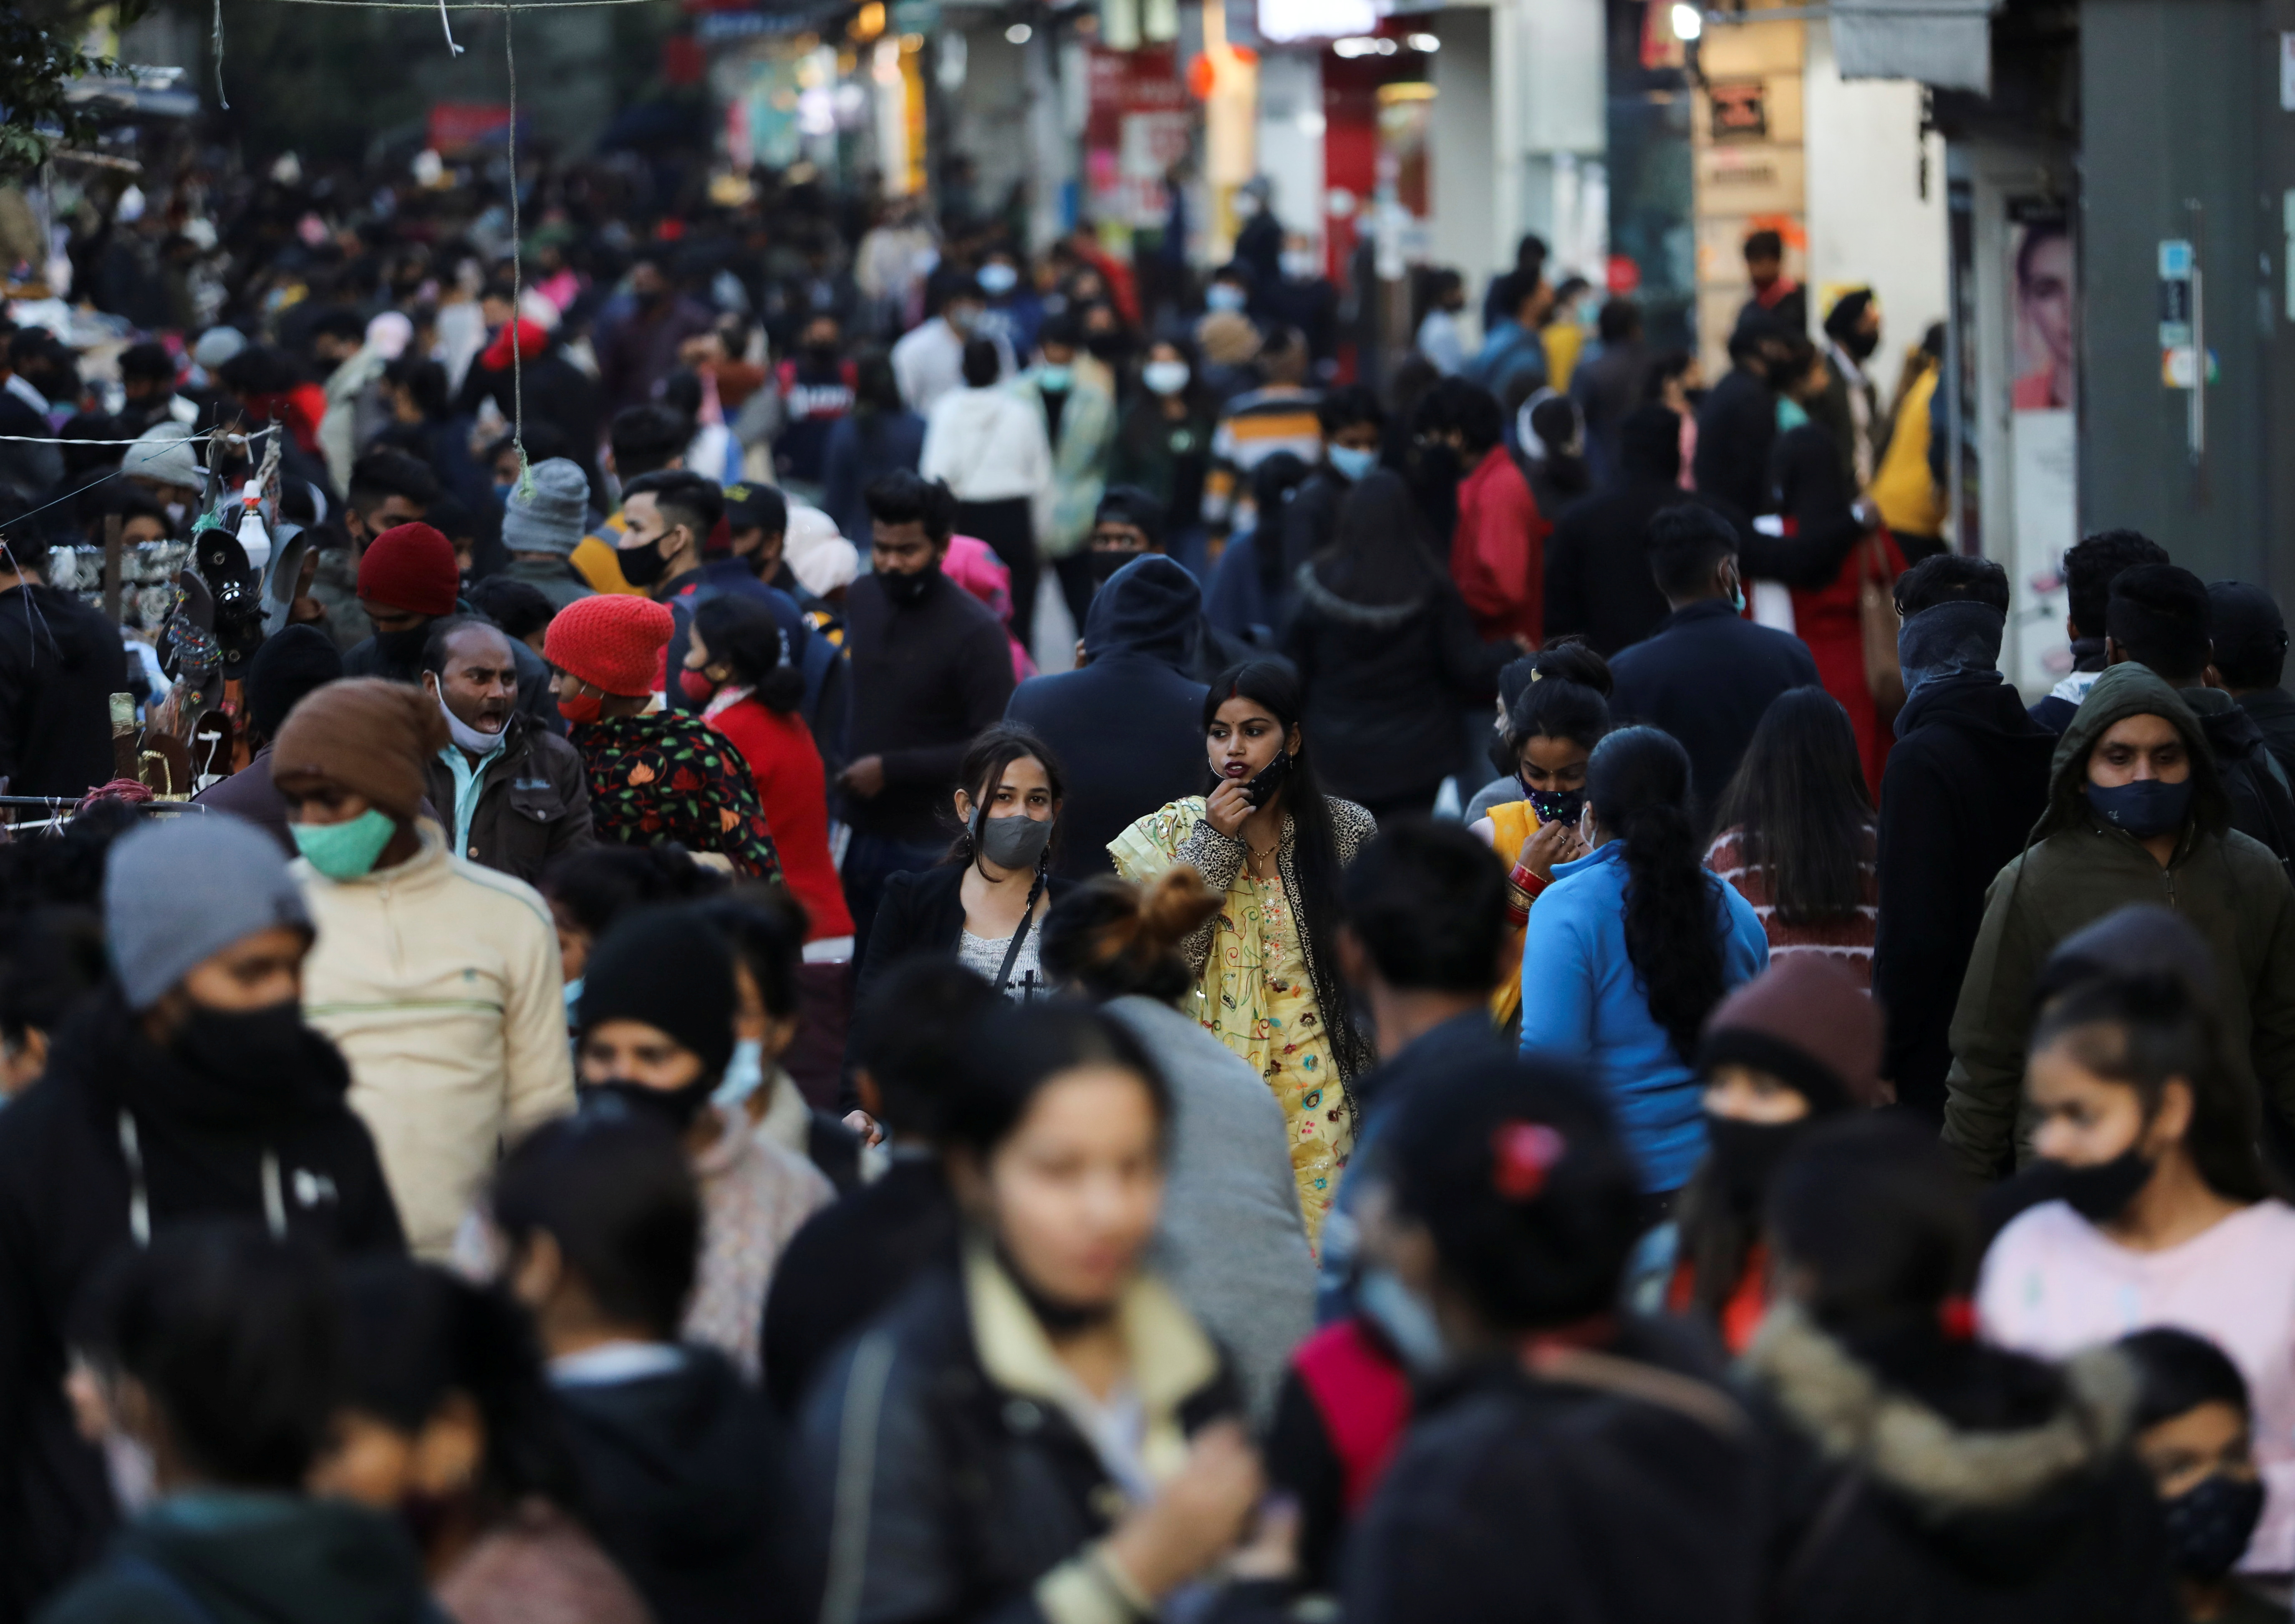 People shop at a market amidst the spread of coronavirus disease (COVID-19) in New Delhi